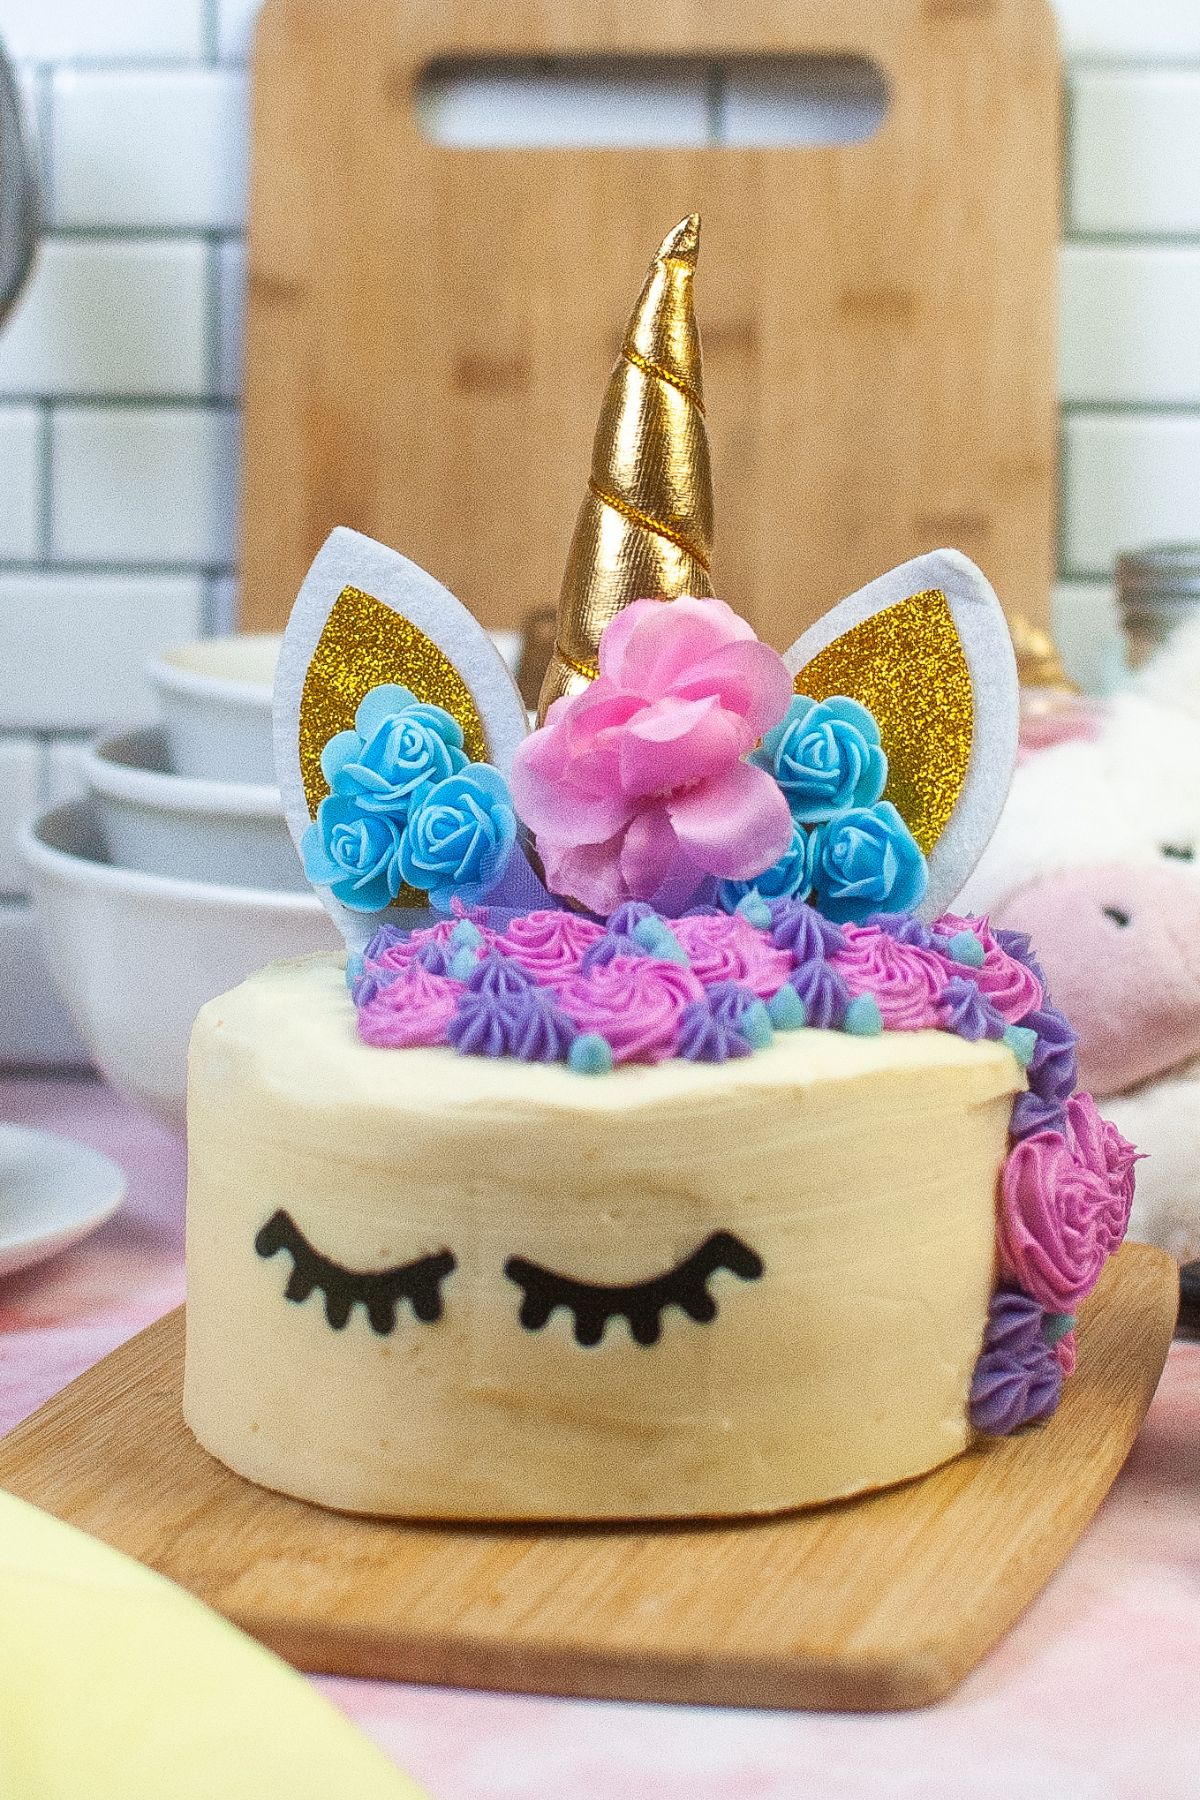 A cake that is frosted to look like a unicorn.